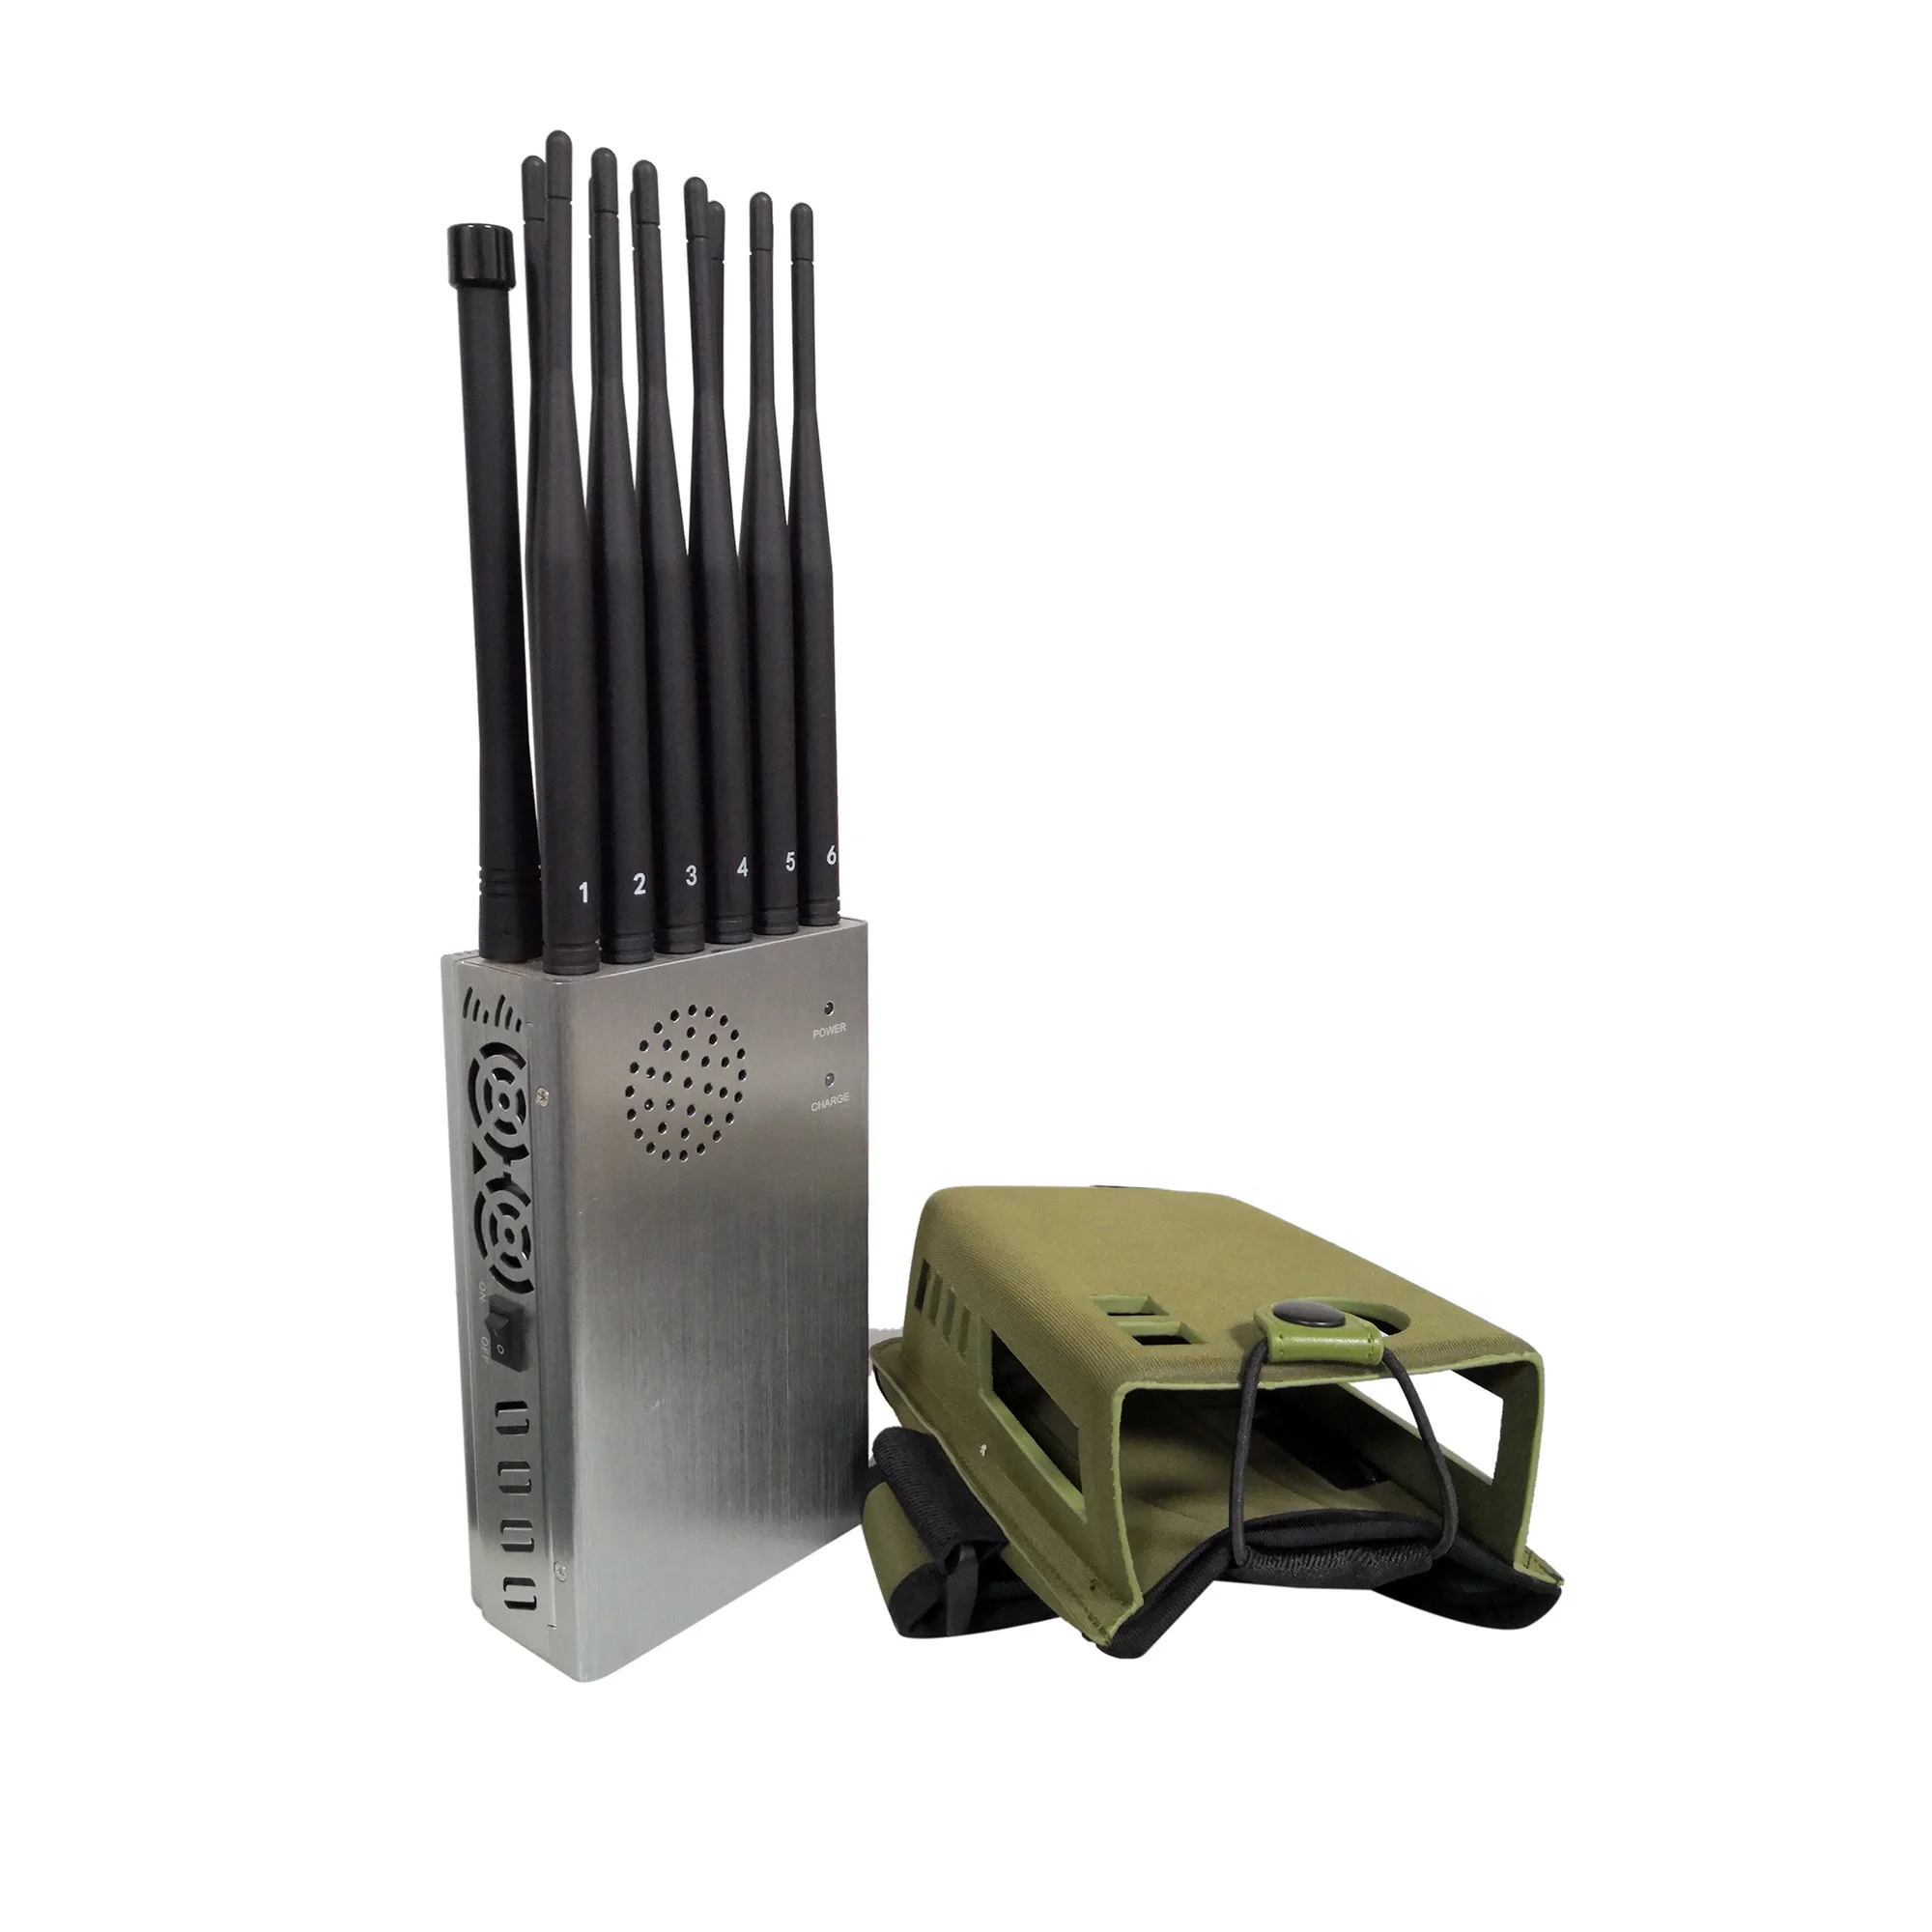 The Latest Handheld 12 Bands Cell Phone Jammer With Nylon Cover,Blocking 5G 4G Wi-Fi5G Jammer